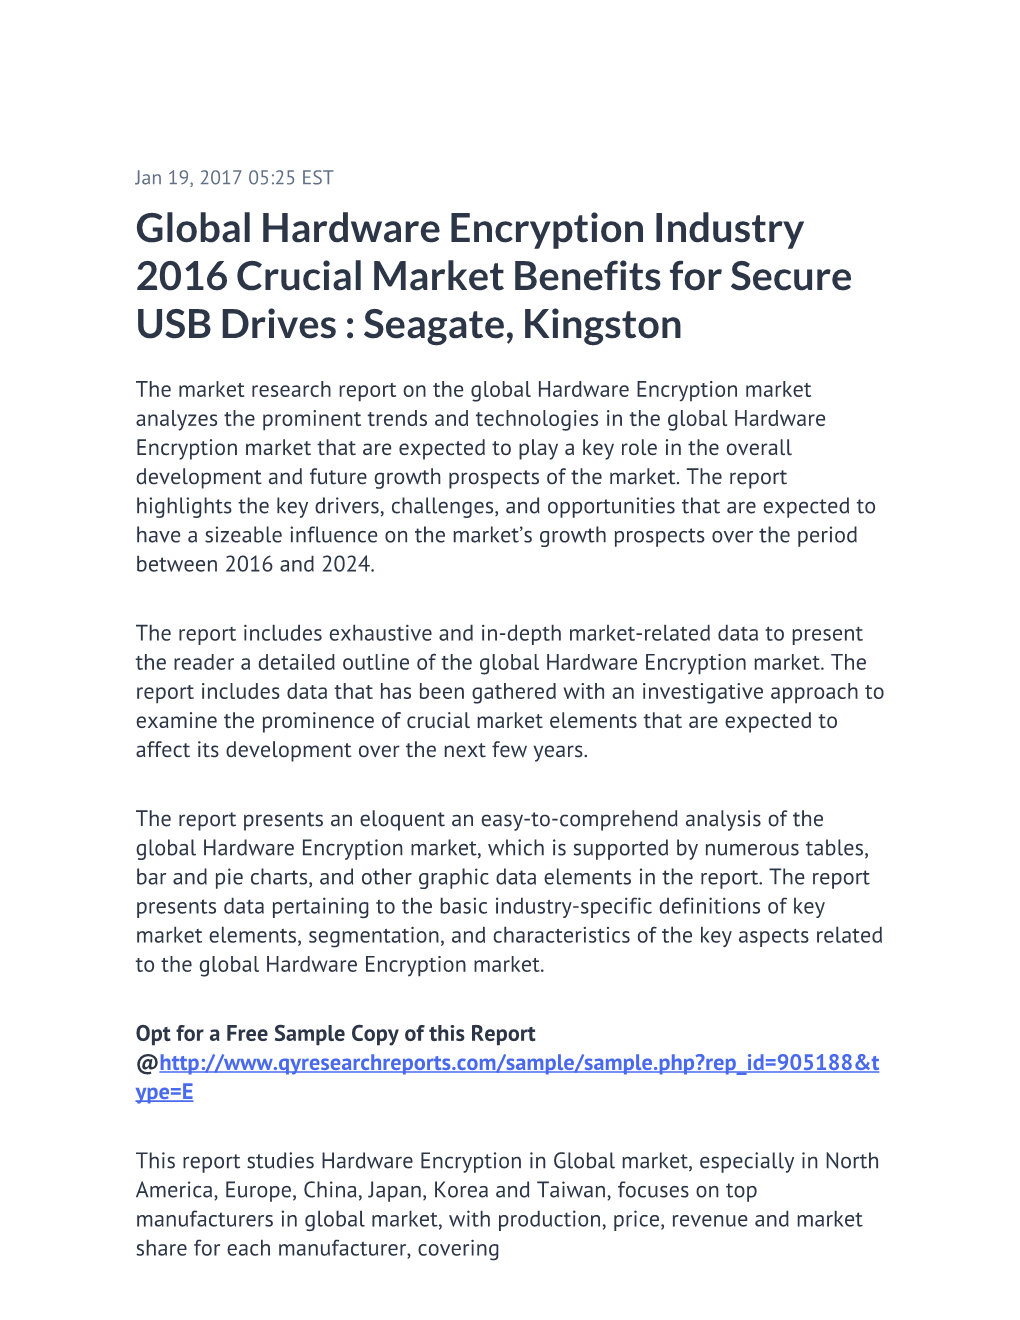 Global Hardware Encryption Industry 2016 Crucial Market Benefits for Secure USB Drives : Seagate, Kingston